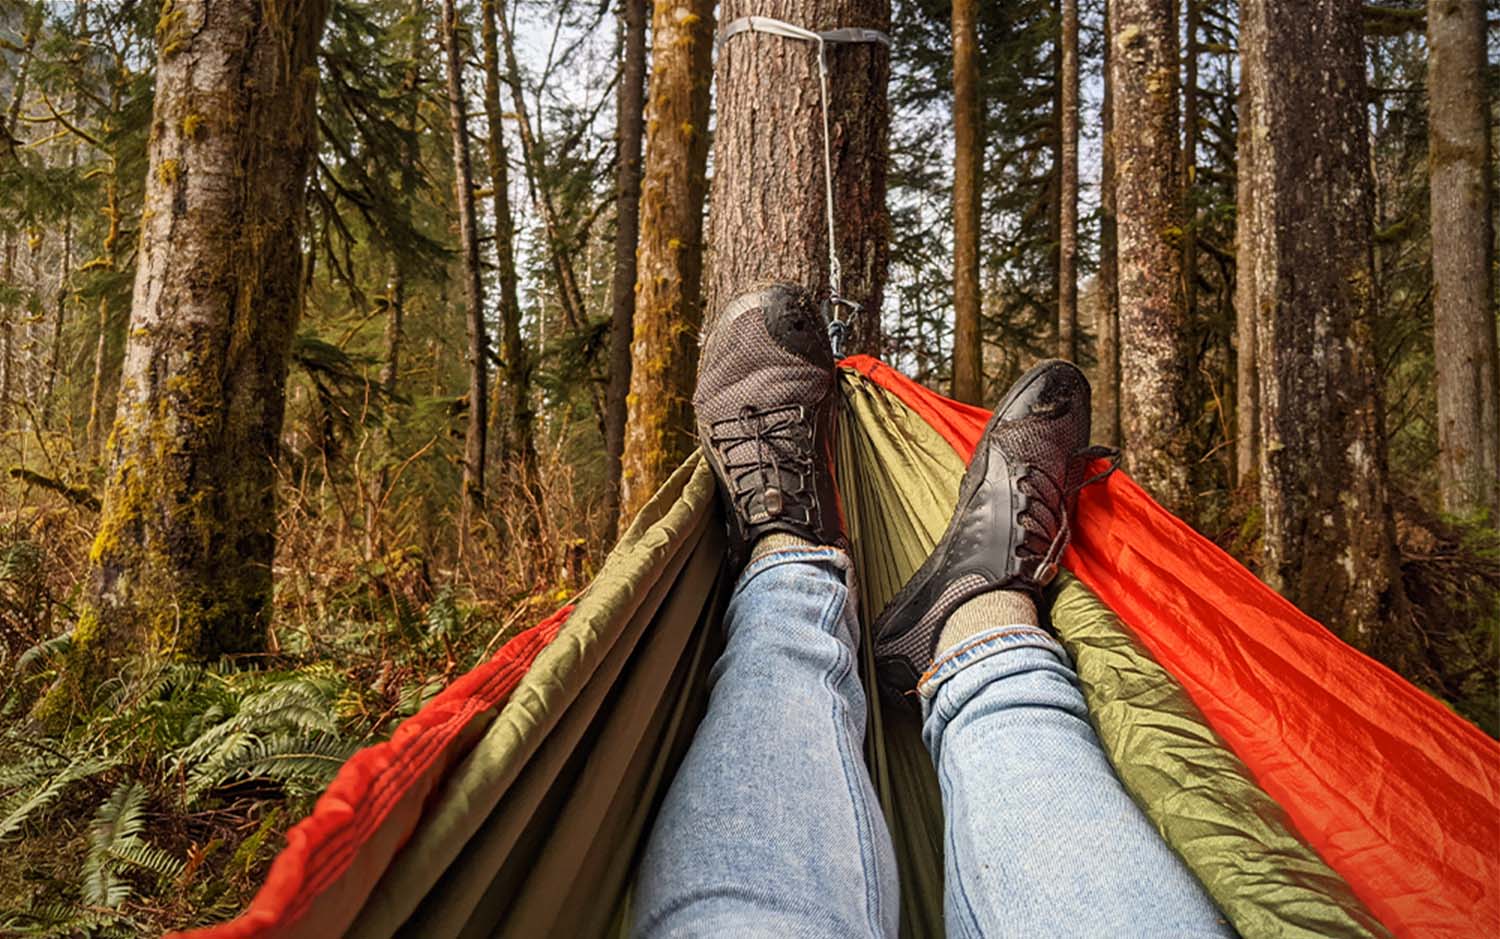 Feet laying in a best camping hammock in the woods